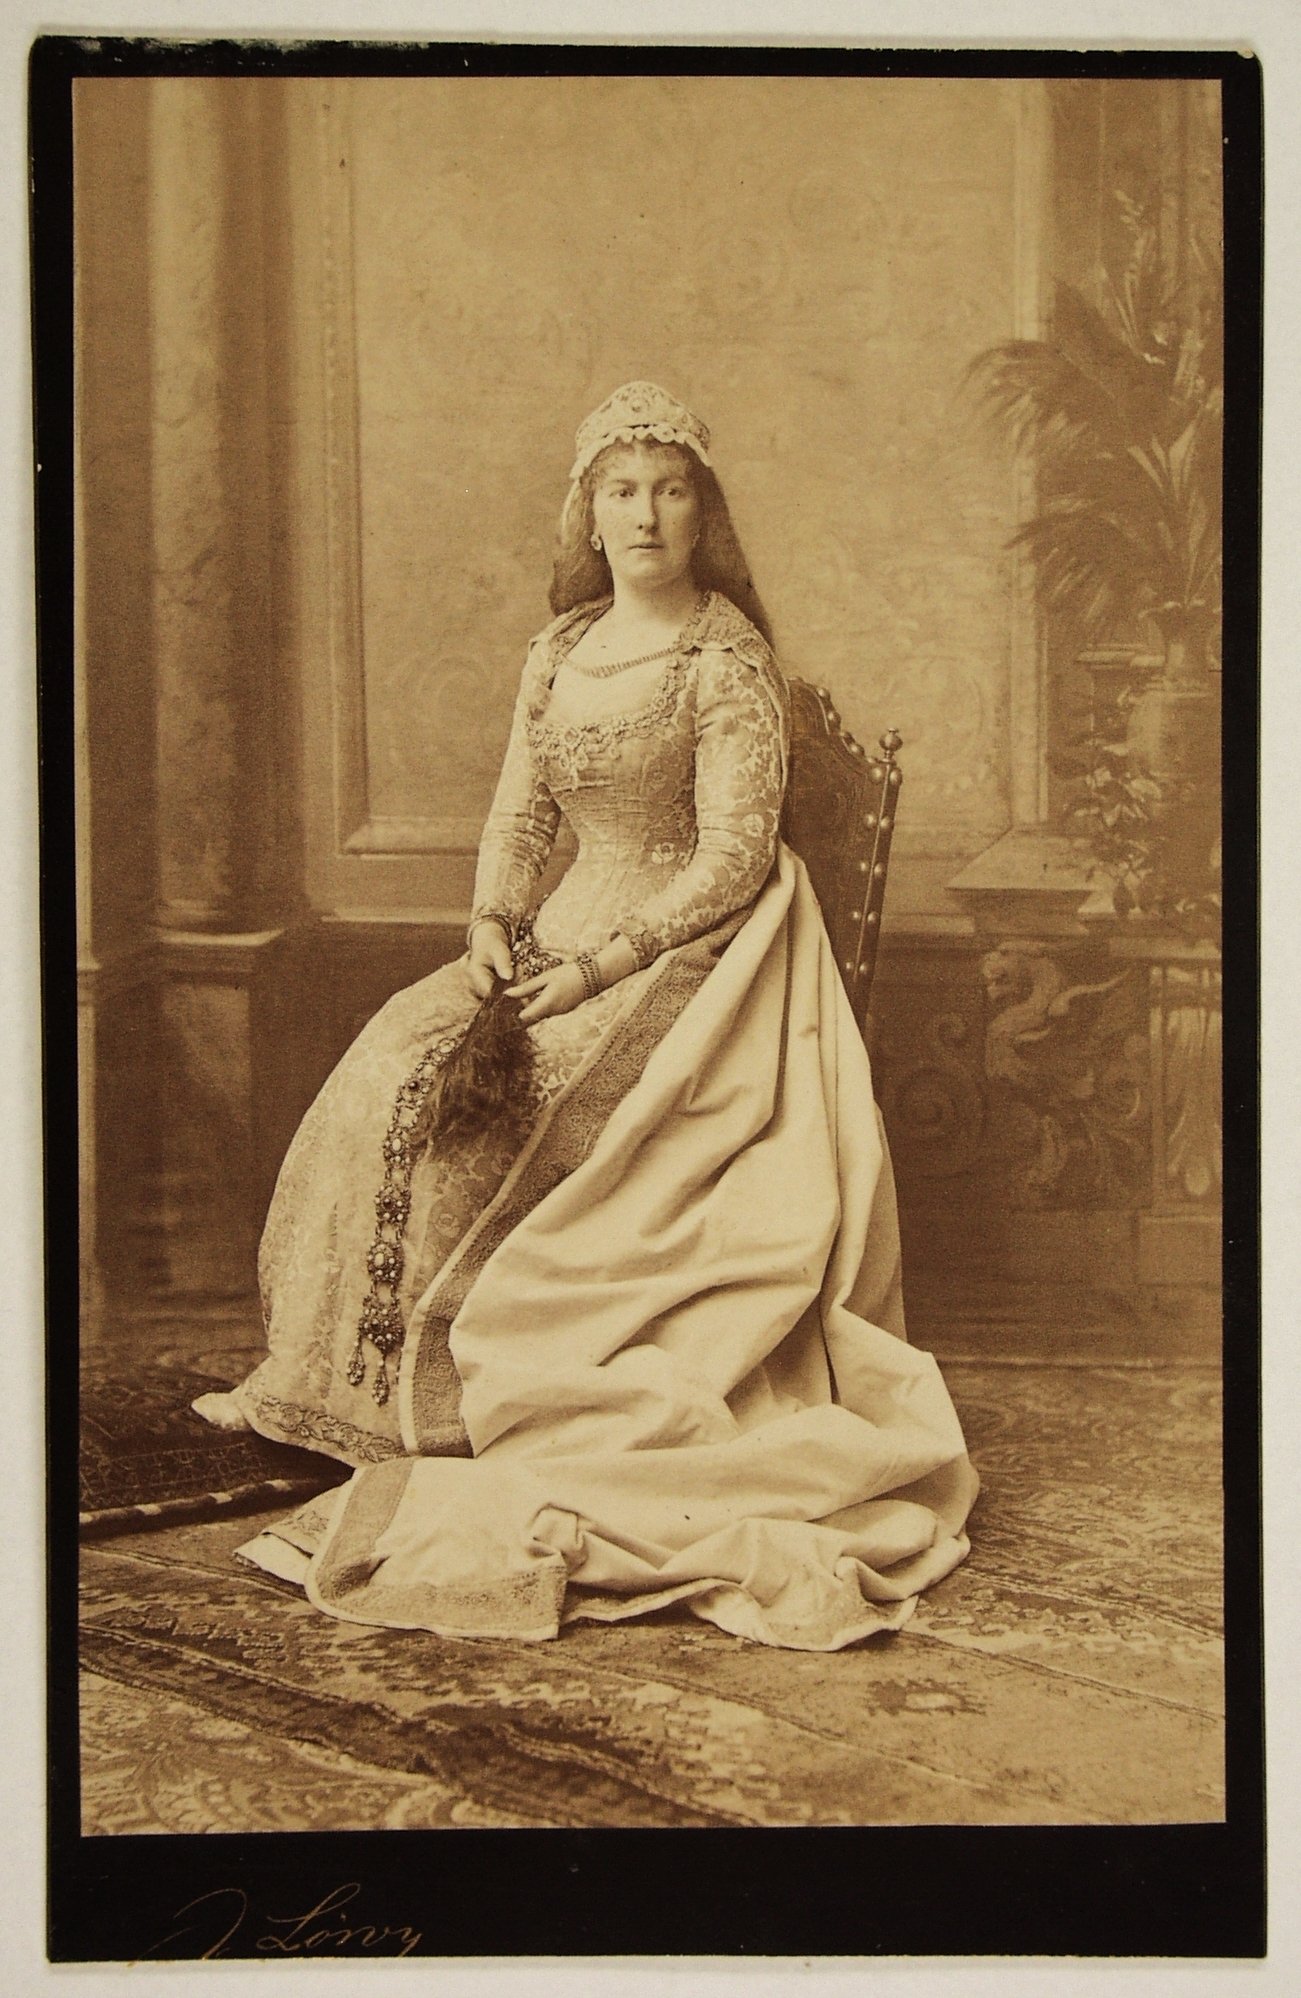  National Archives of Hungary, Festetics family archives, Princess Lujza Maria of Belgium, as Elsa in Lohengrin, 1885